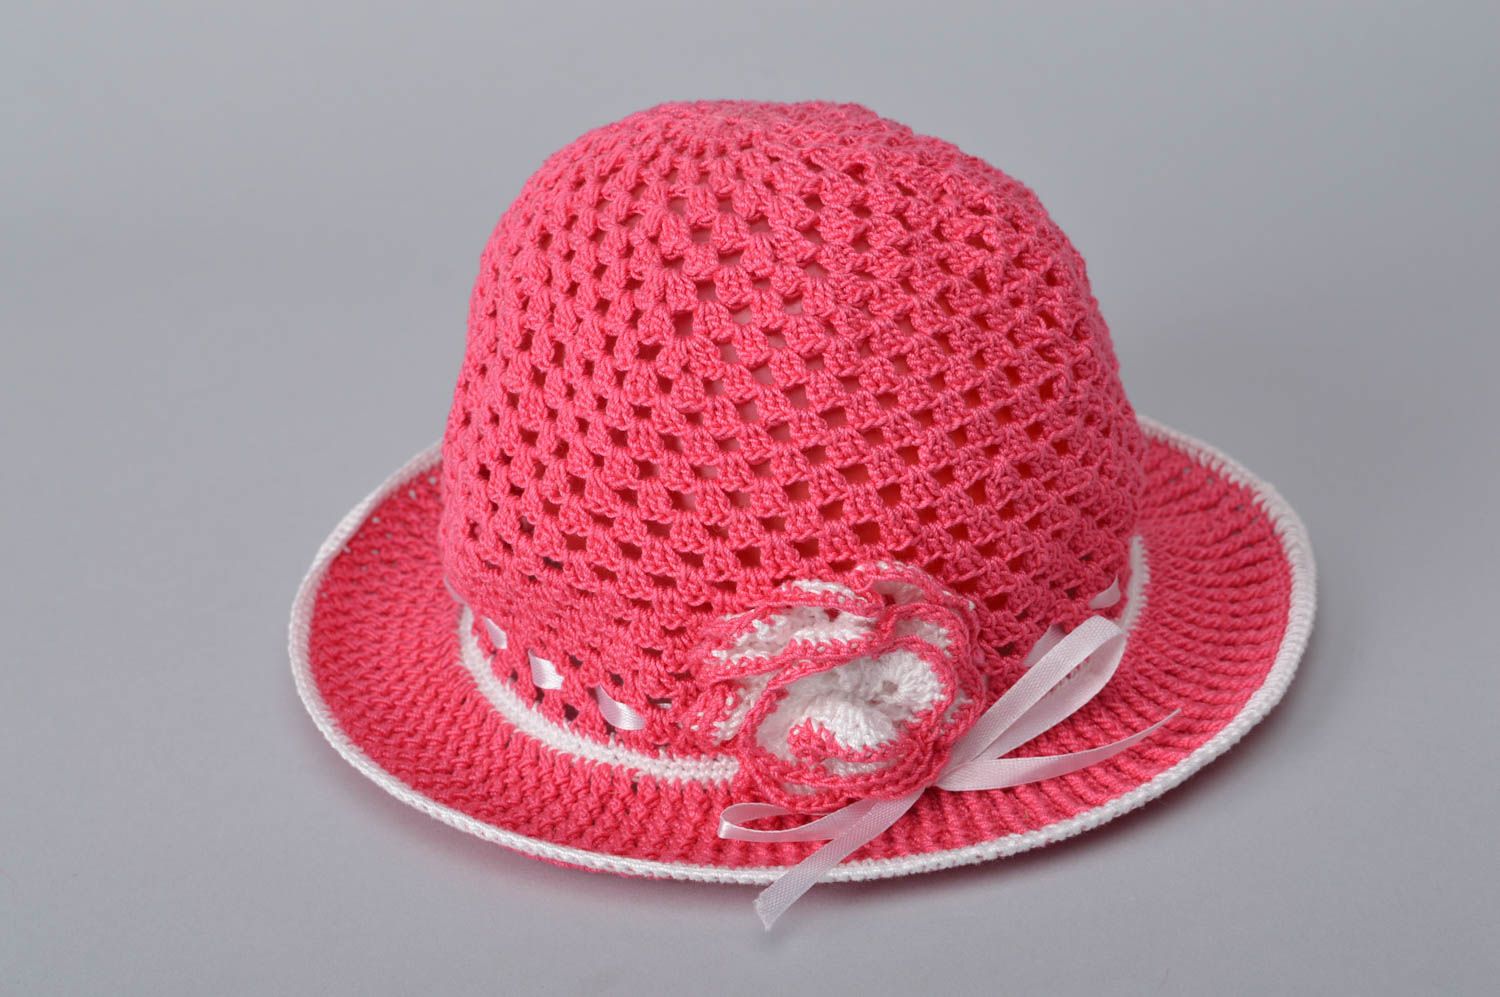 Crochet hat handmade accessories kids clothing gifts for baby girl toddler hat photo 7